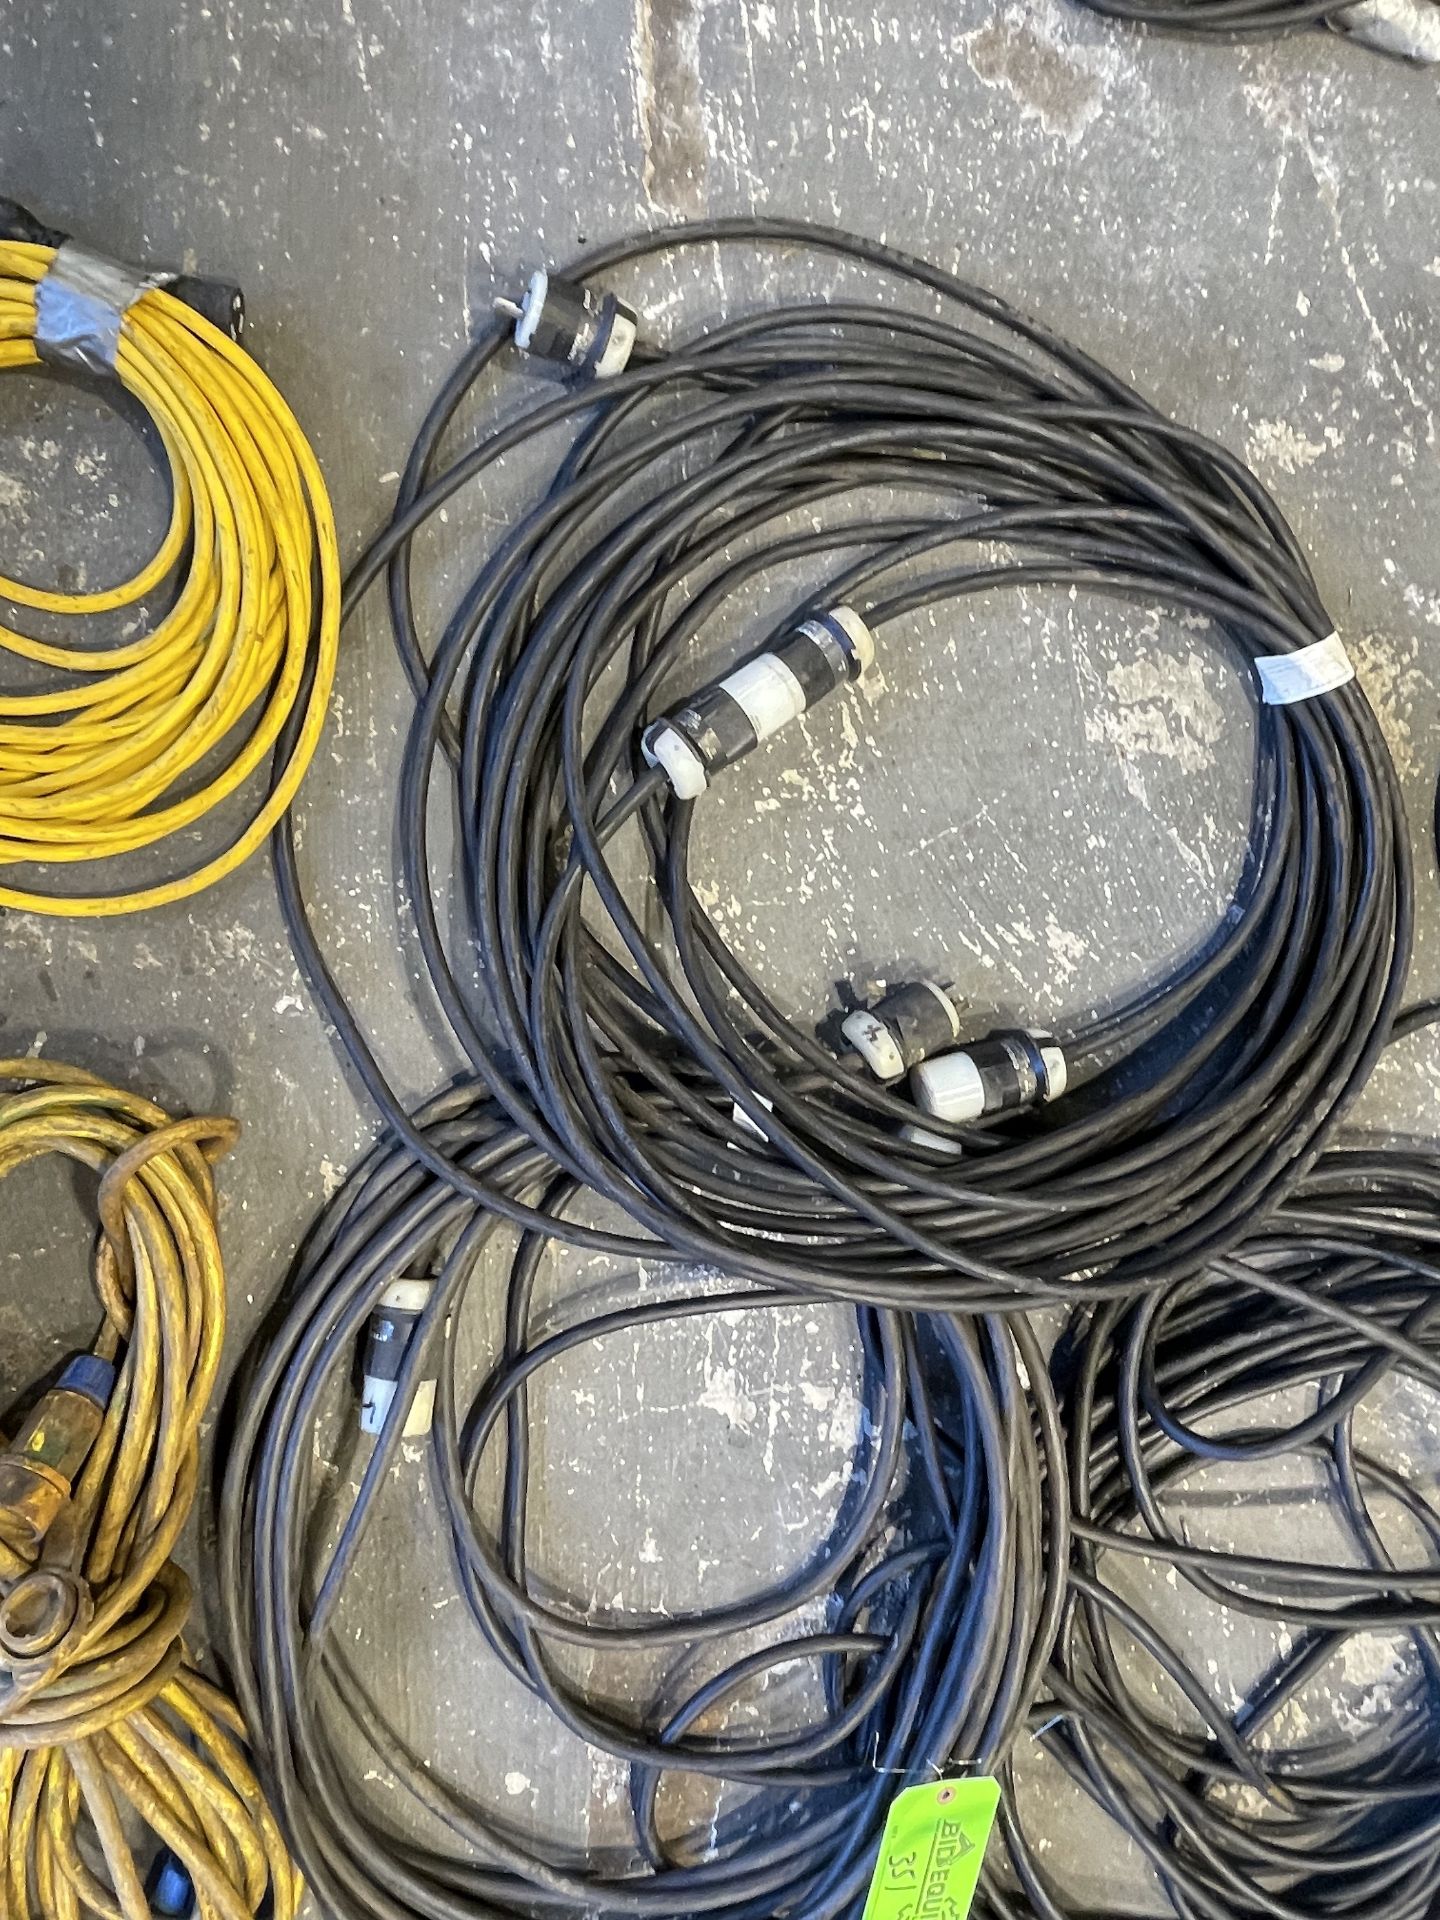 Lot of Extension Cords - Upland - Image 6 of 11